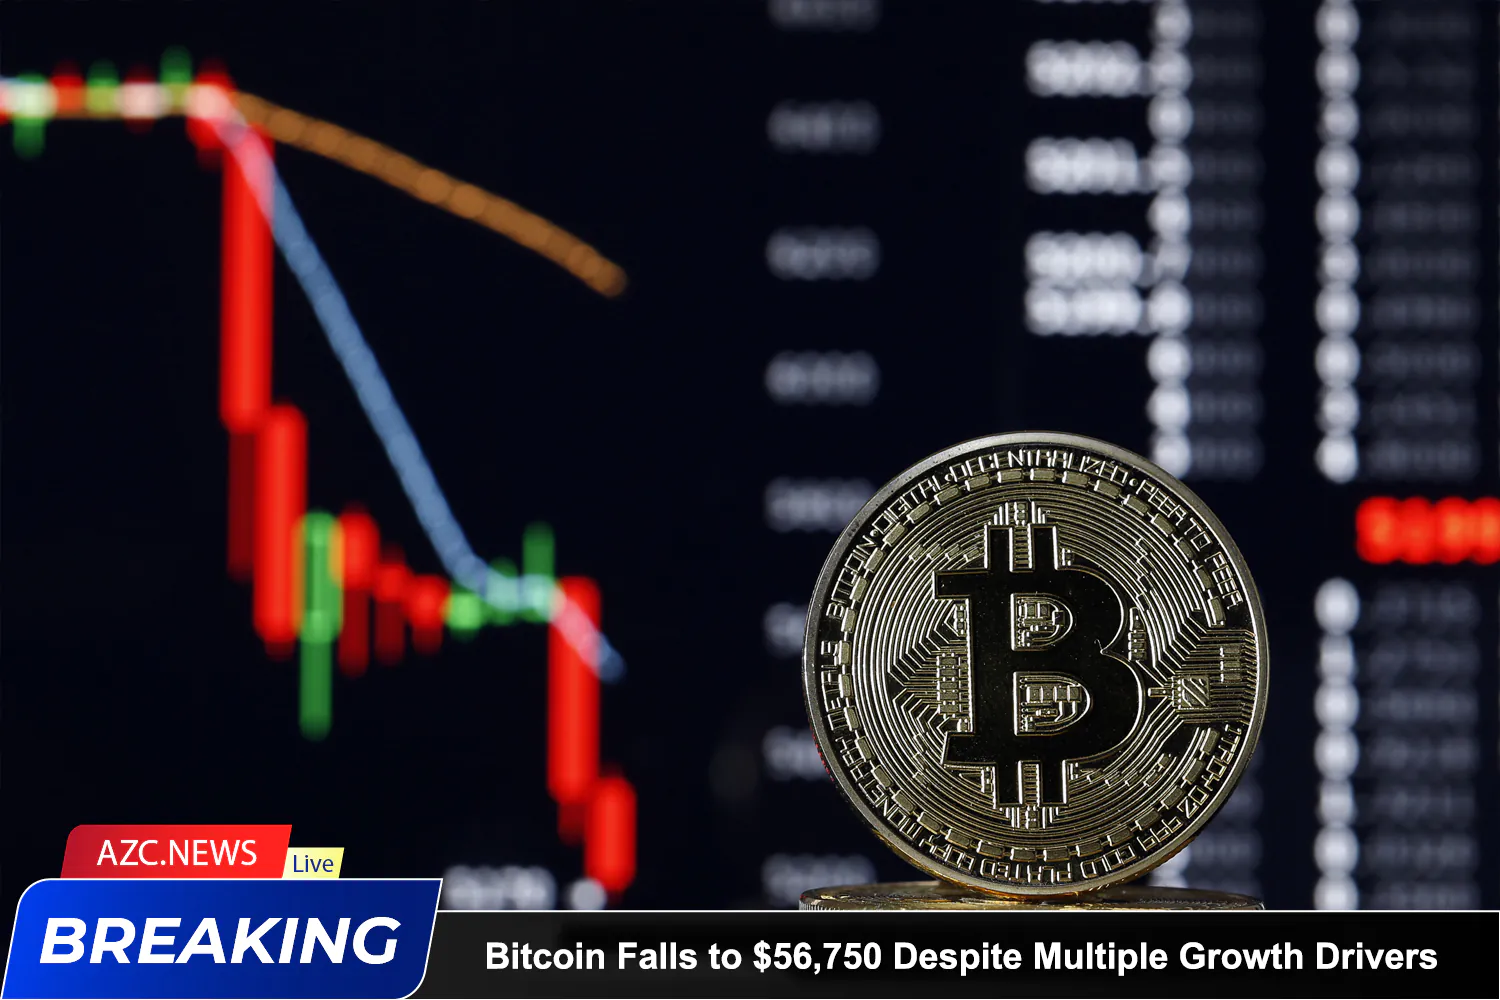 Azcnews Bitcoin Falls To $56,750 Despite Multiple Growth Drivers